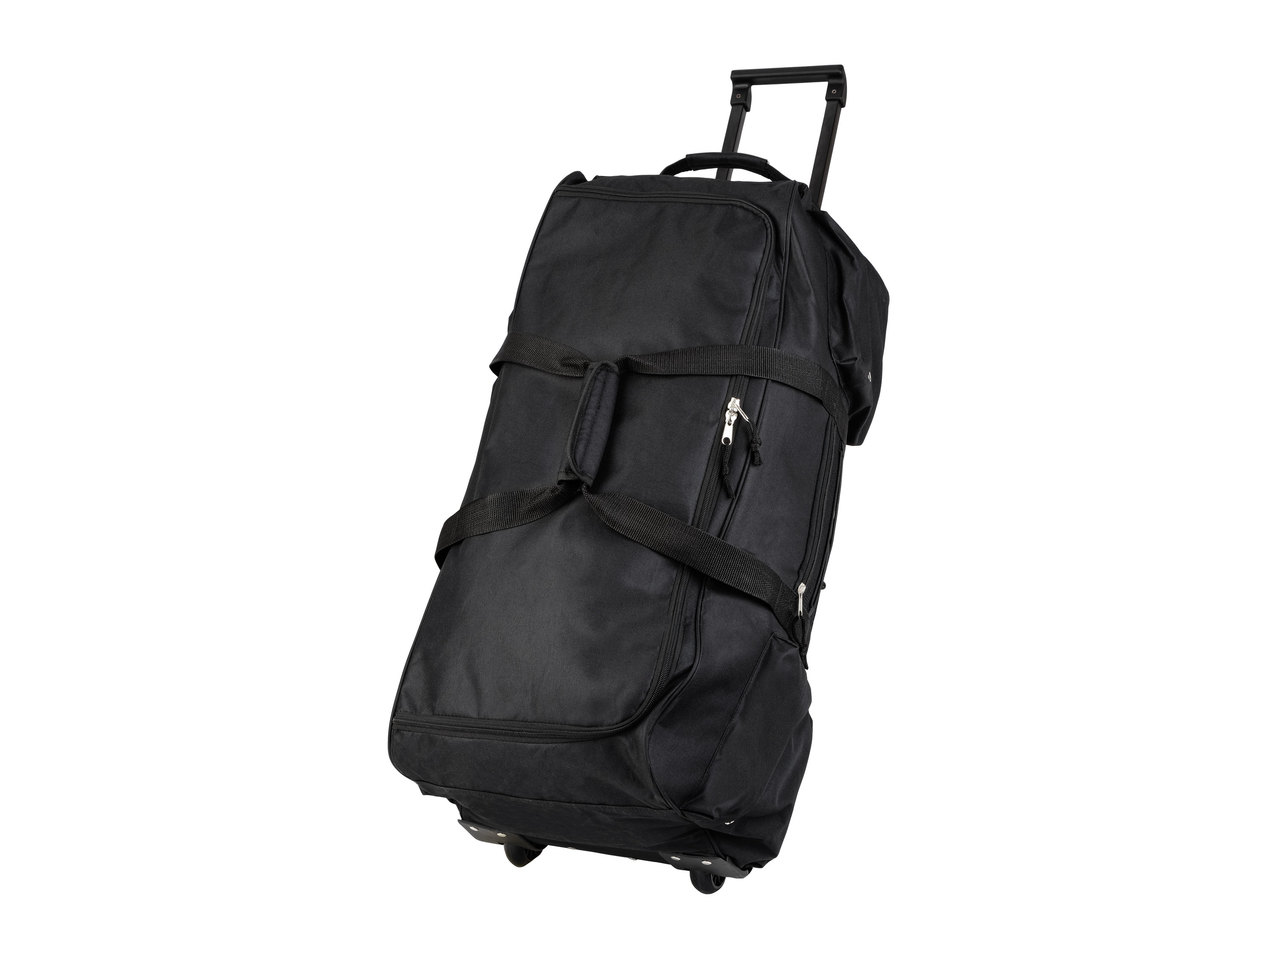 Top Move Trolley Travel Bag1